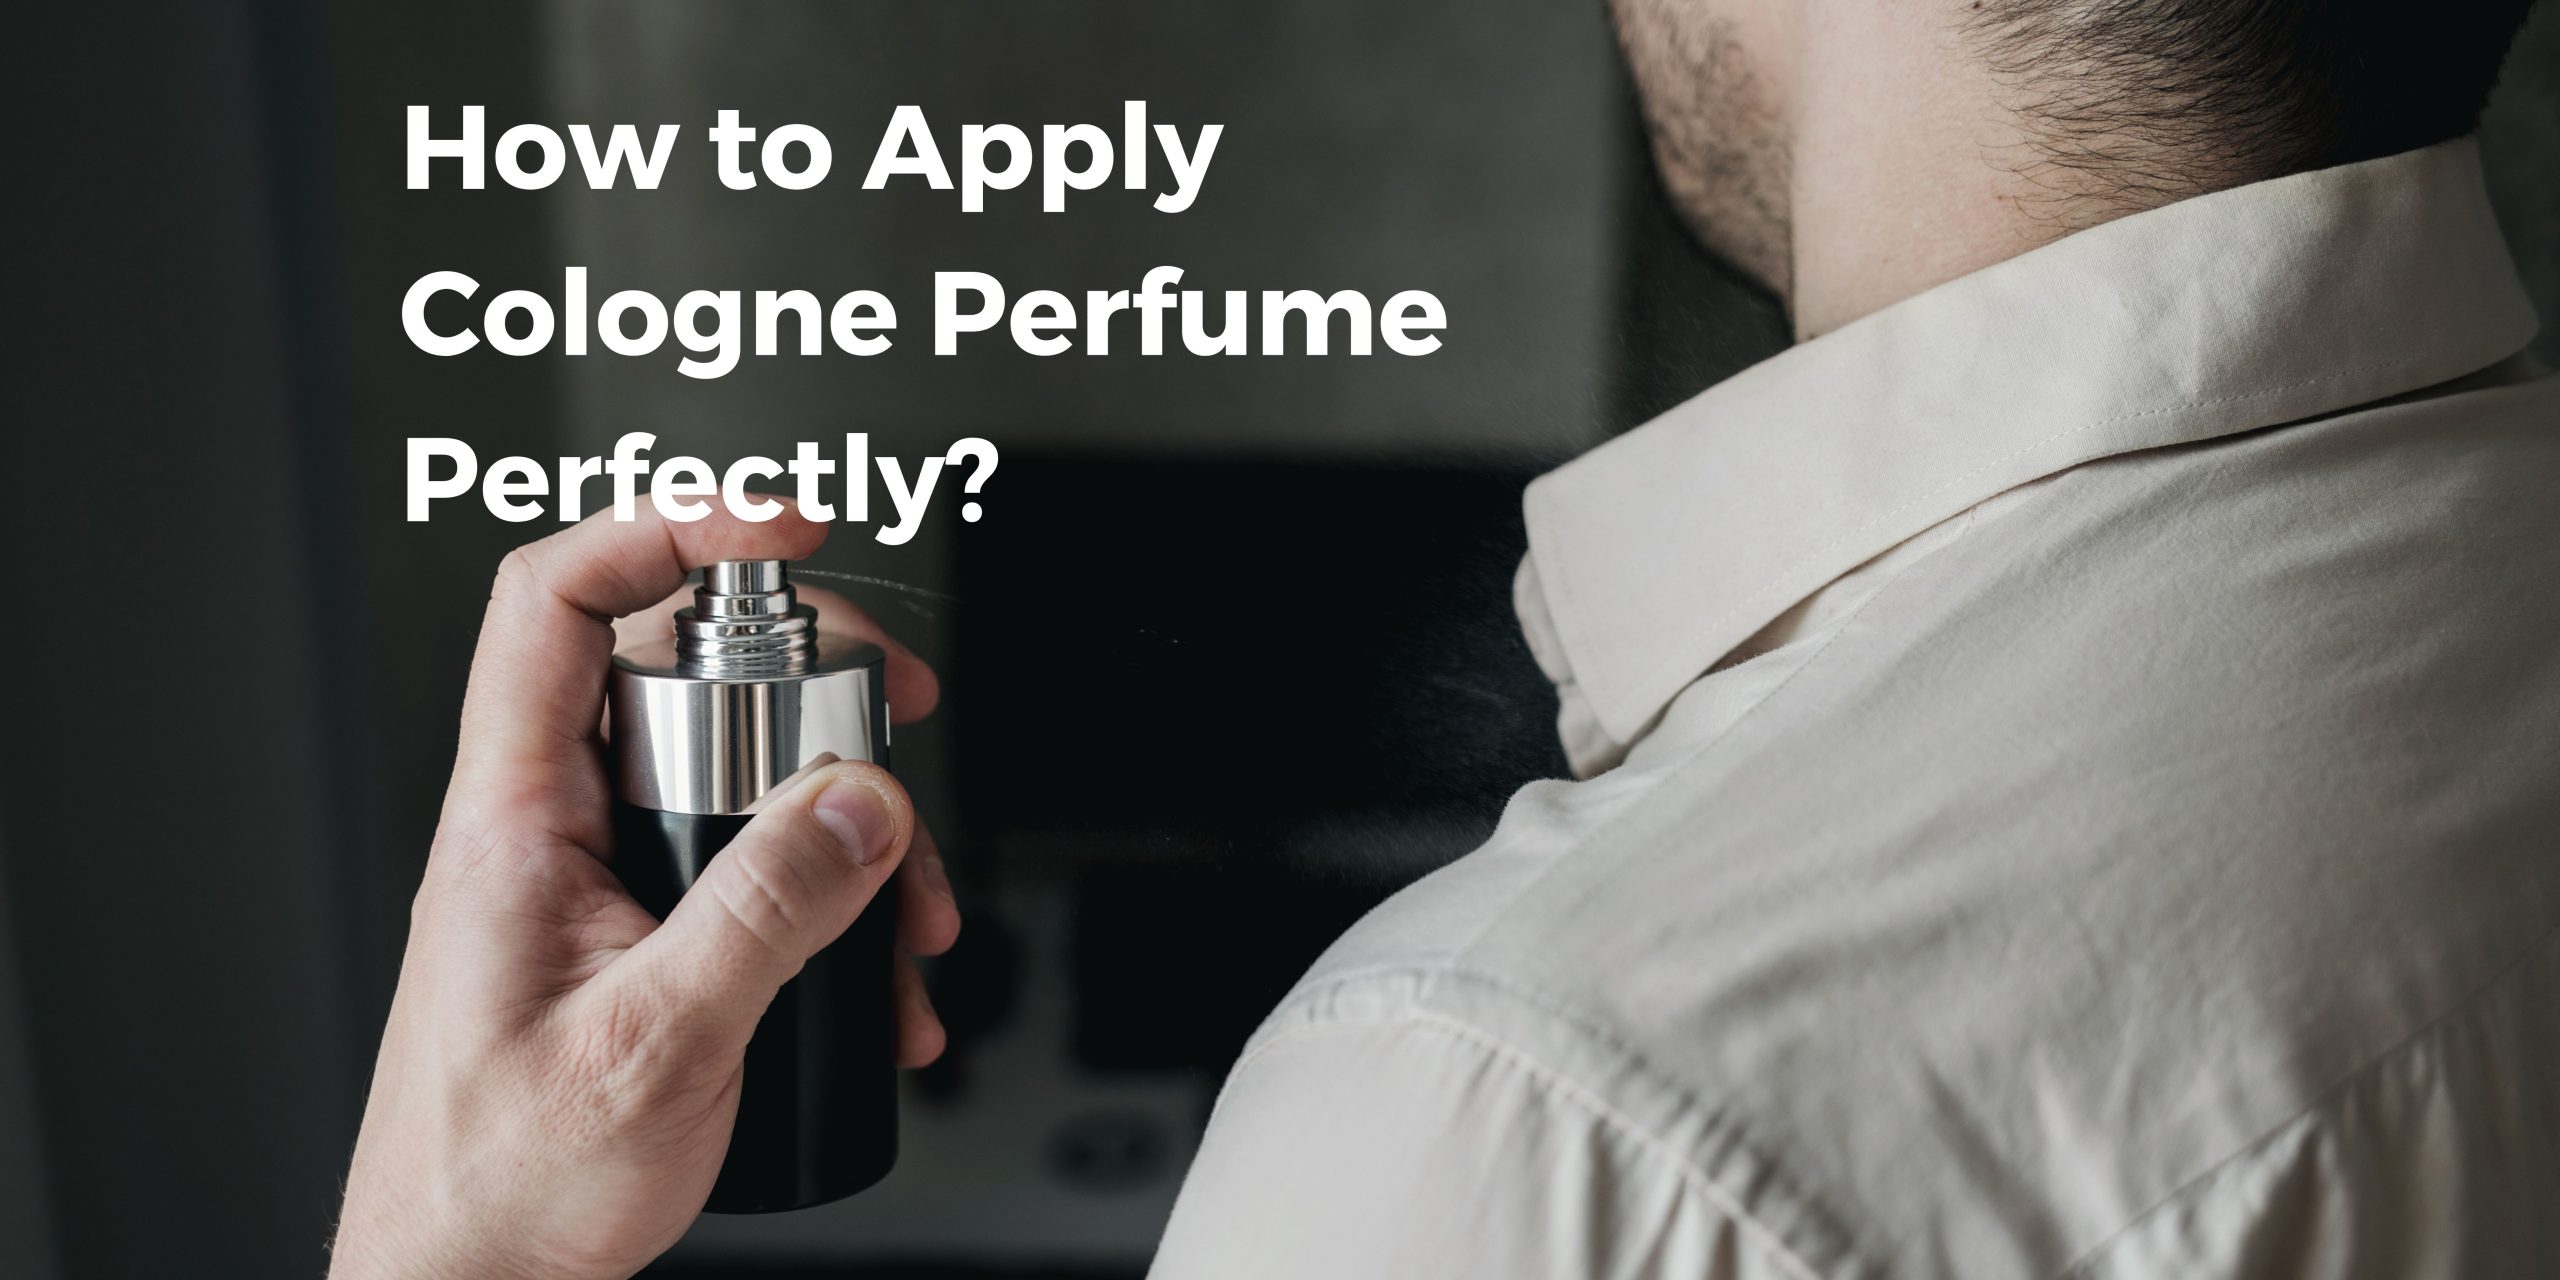 How to Apply Cologne Perfume Perfectly?